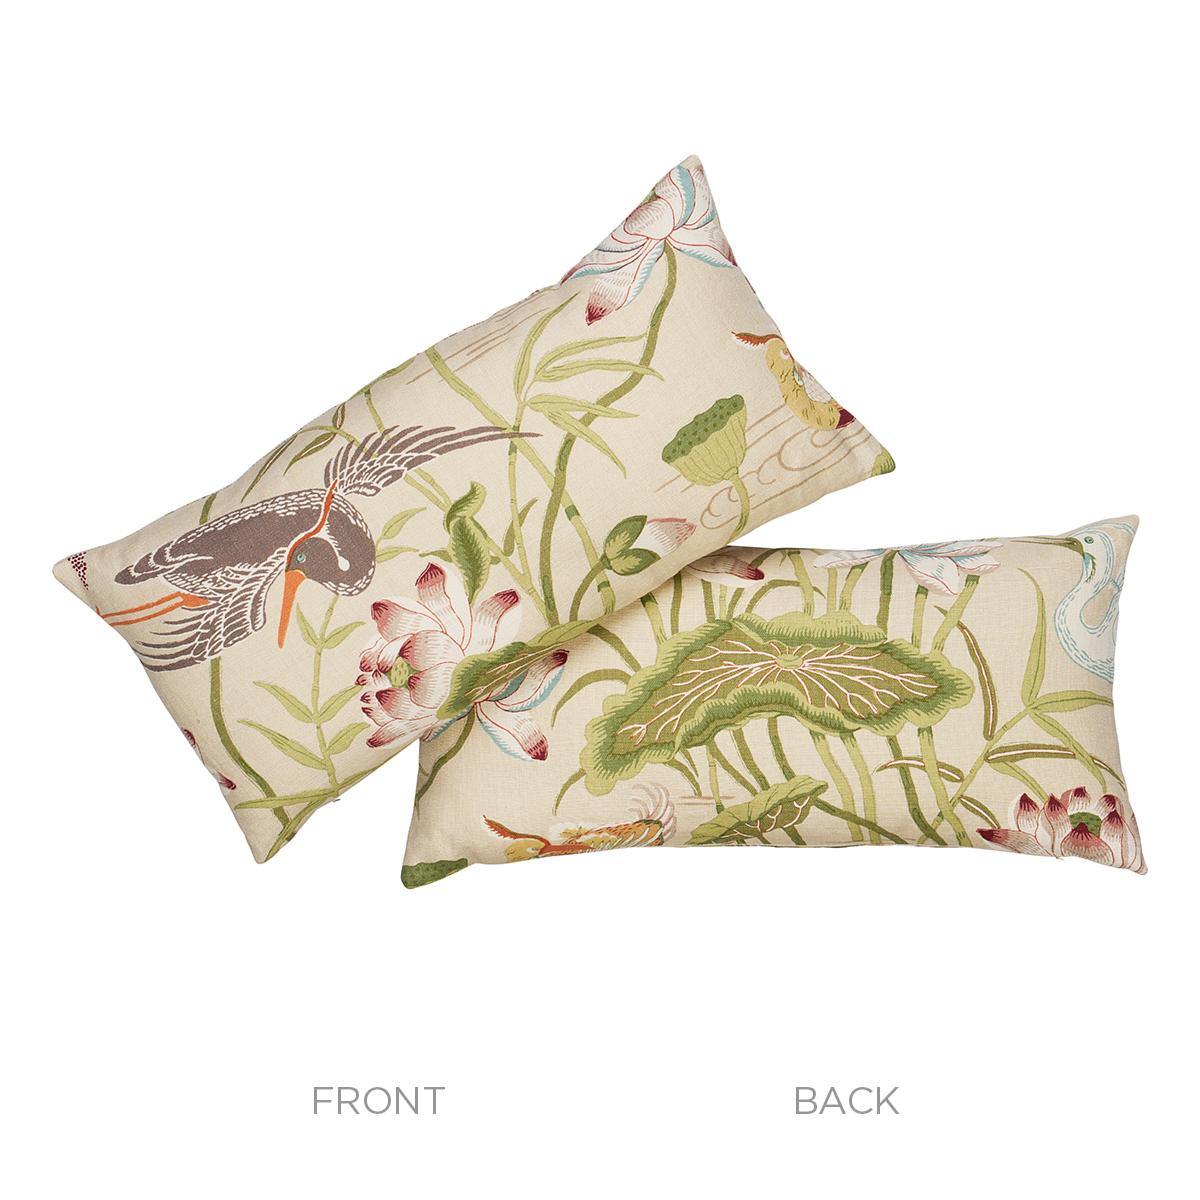 This pillow features Lotus Garden with a self welt finish. Lotus Garden is an enchanting pattern recreated from a 1920s document in our archives. The masterful design is an ode to Japanese natural motifs. Pillow includes a feather/down fill insert